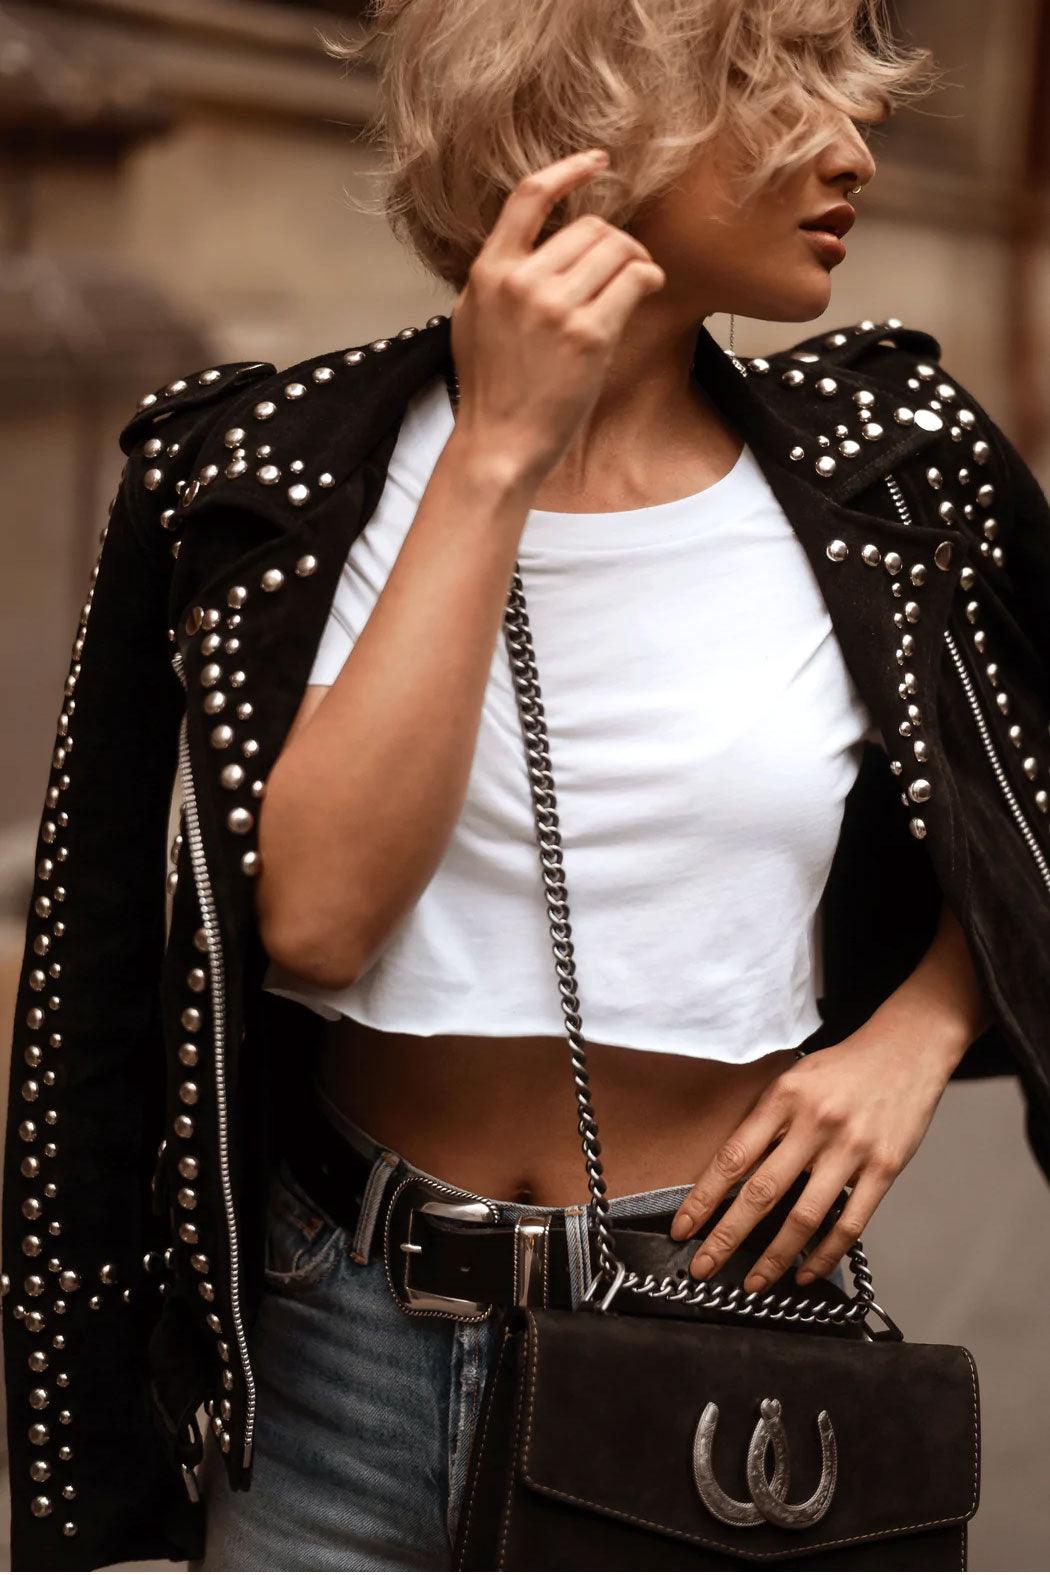 Women Style Silver Studded Black Suede Leather Jacket - Leather Loom